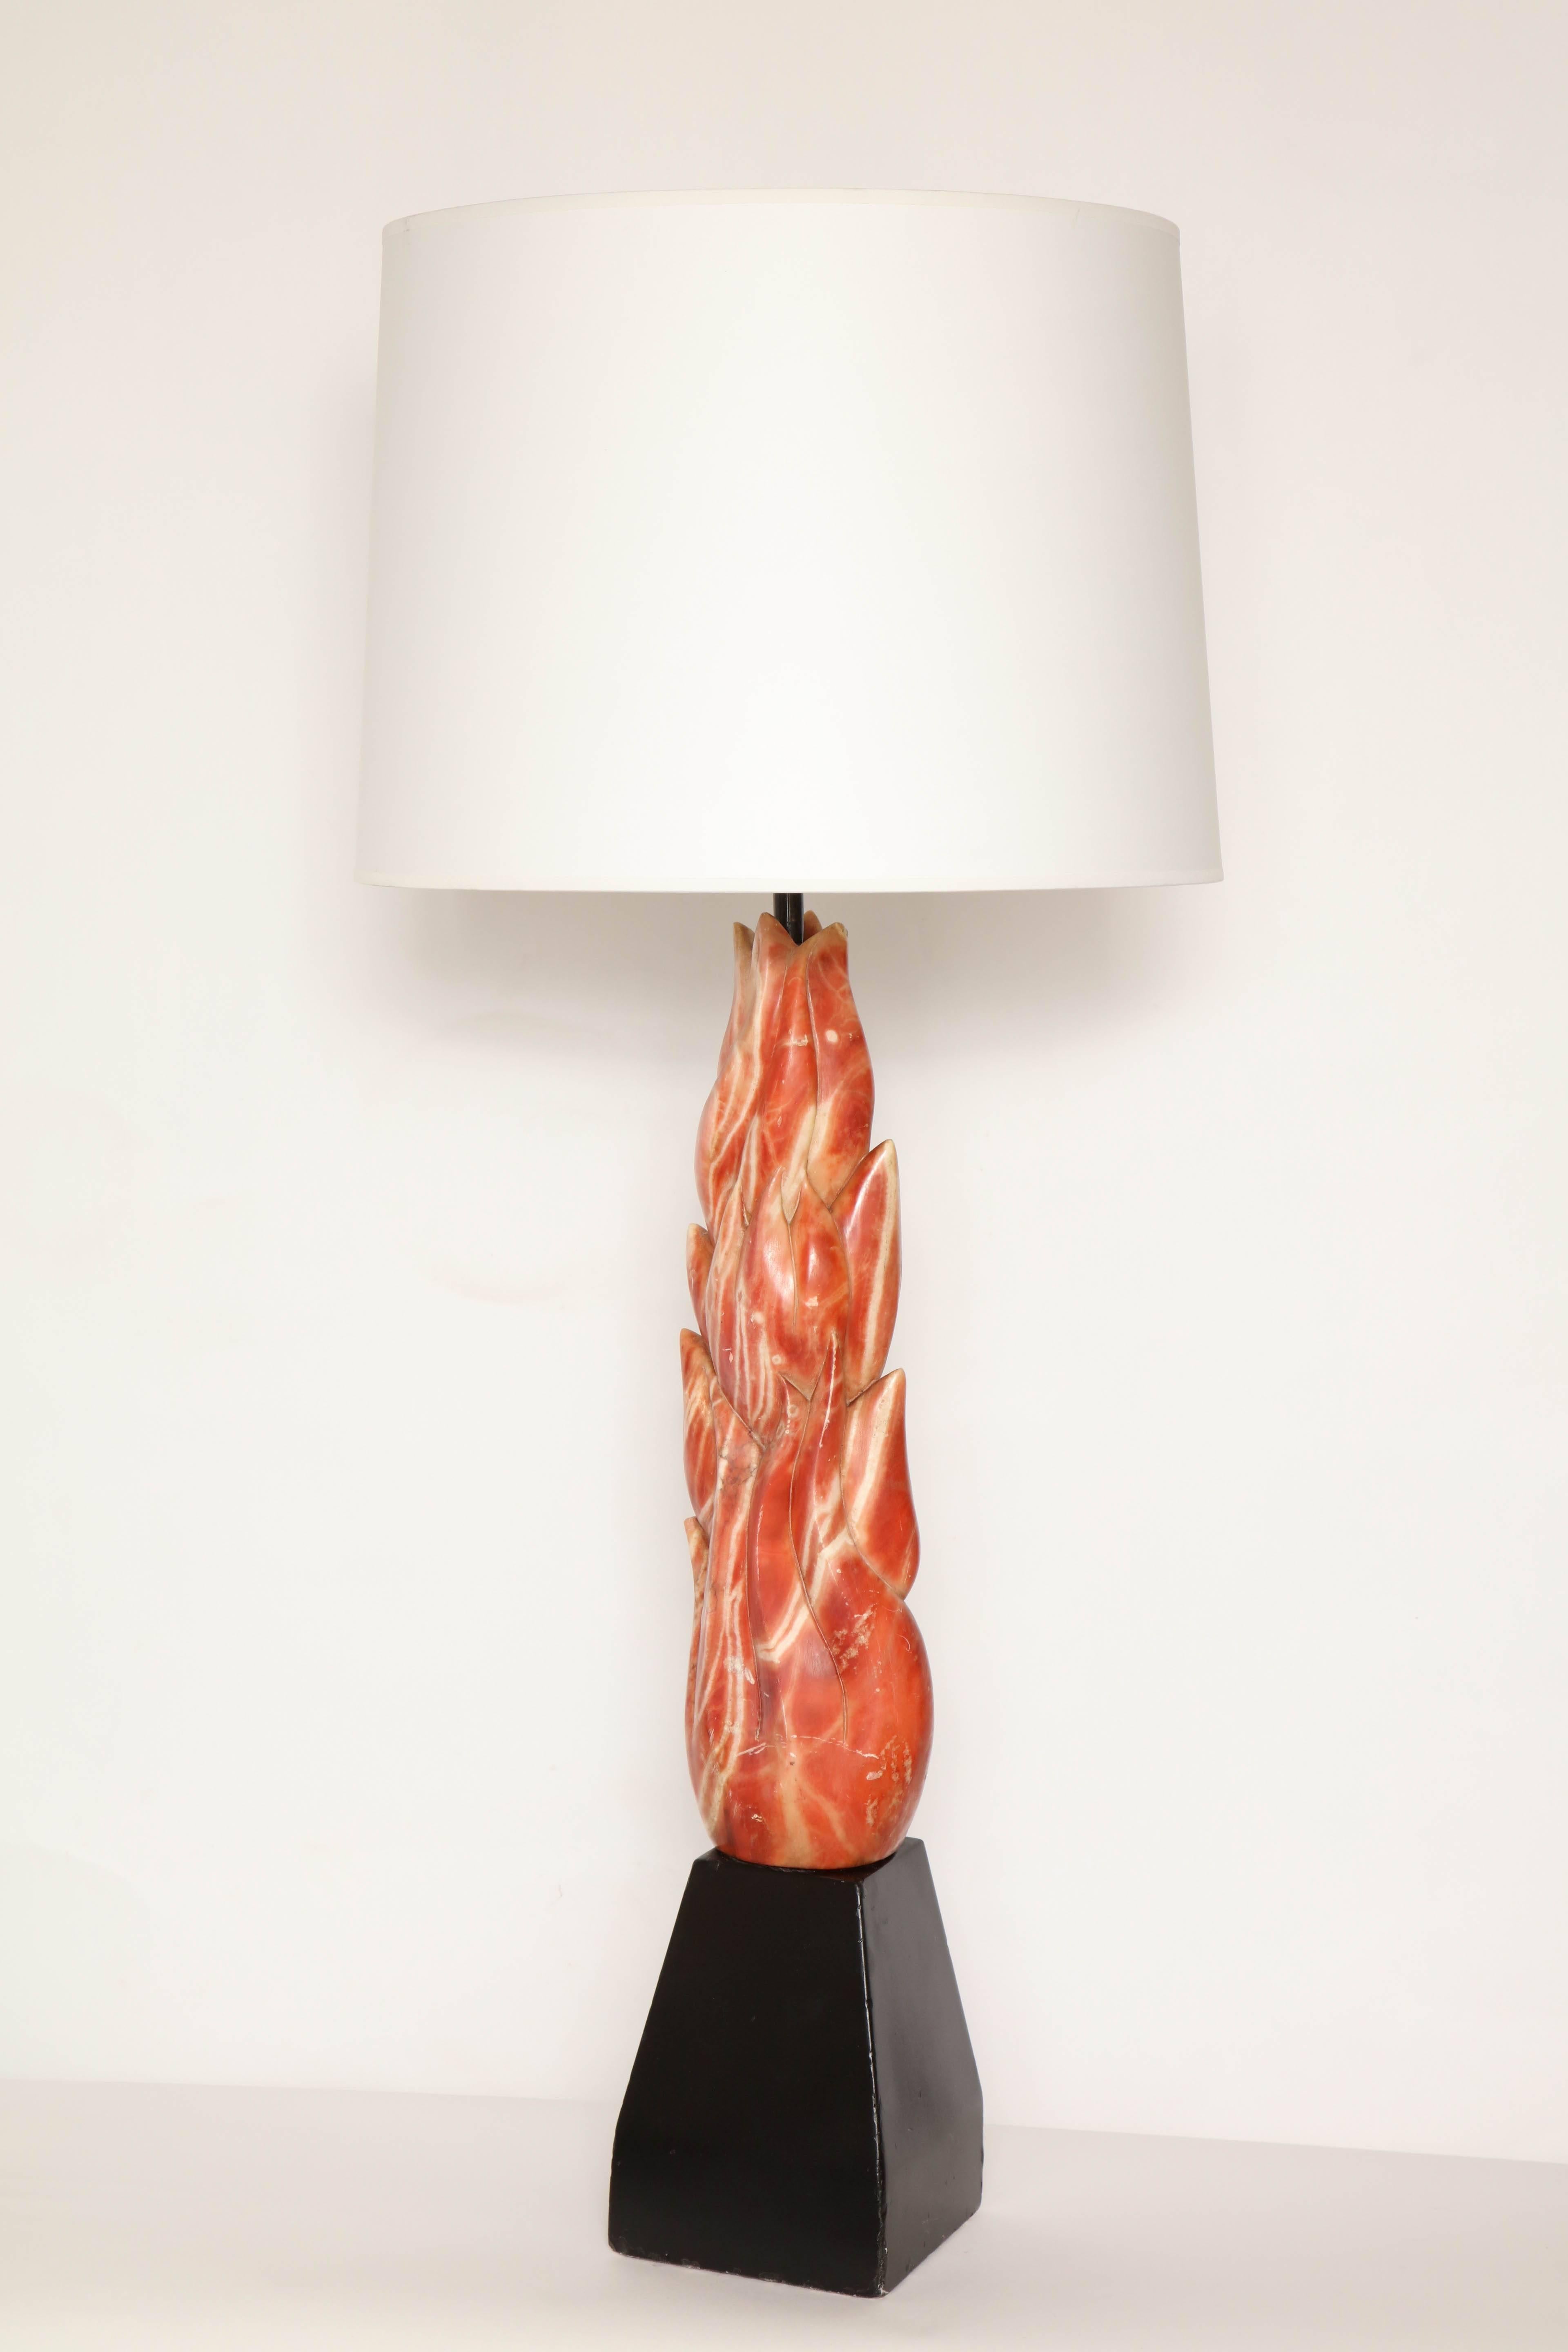 An Art Moderne, 1940s sculptural marble table lamp.
Shade not included